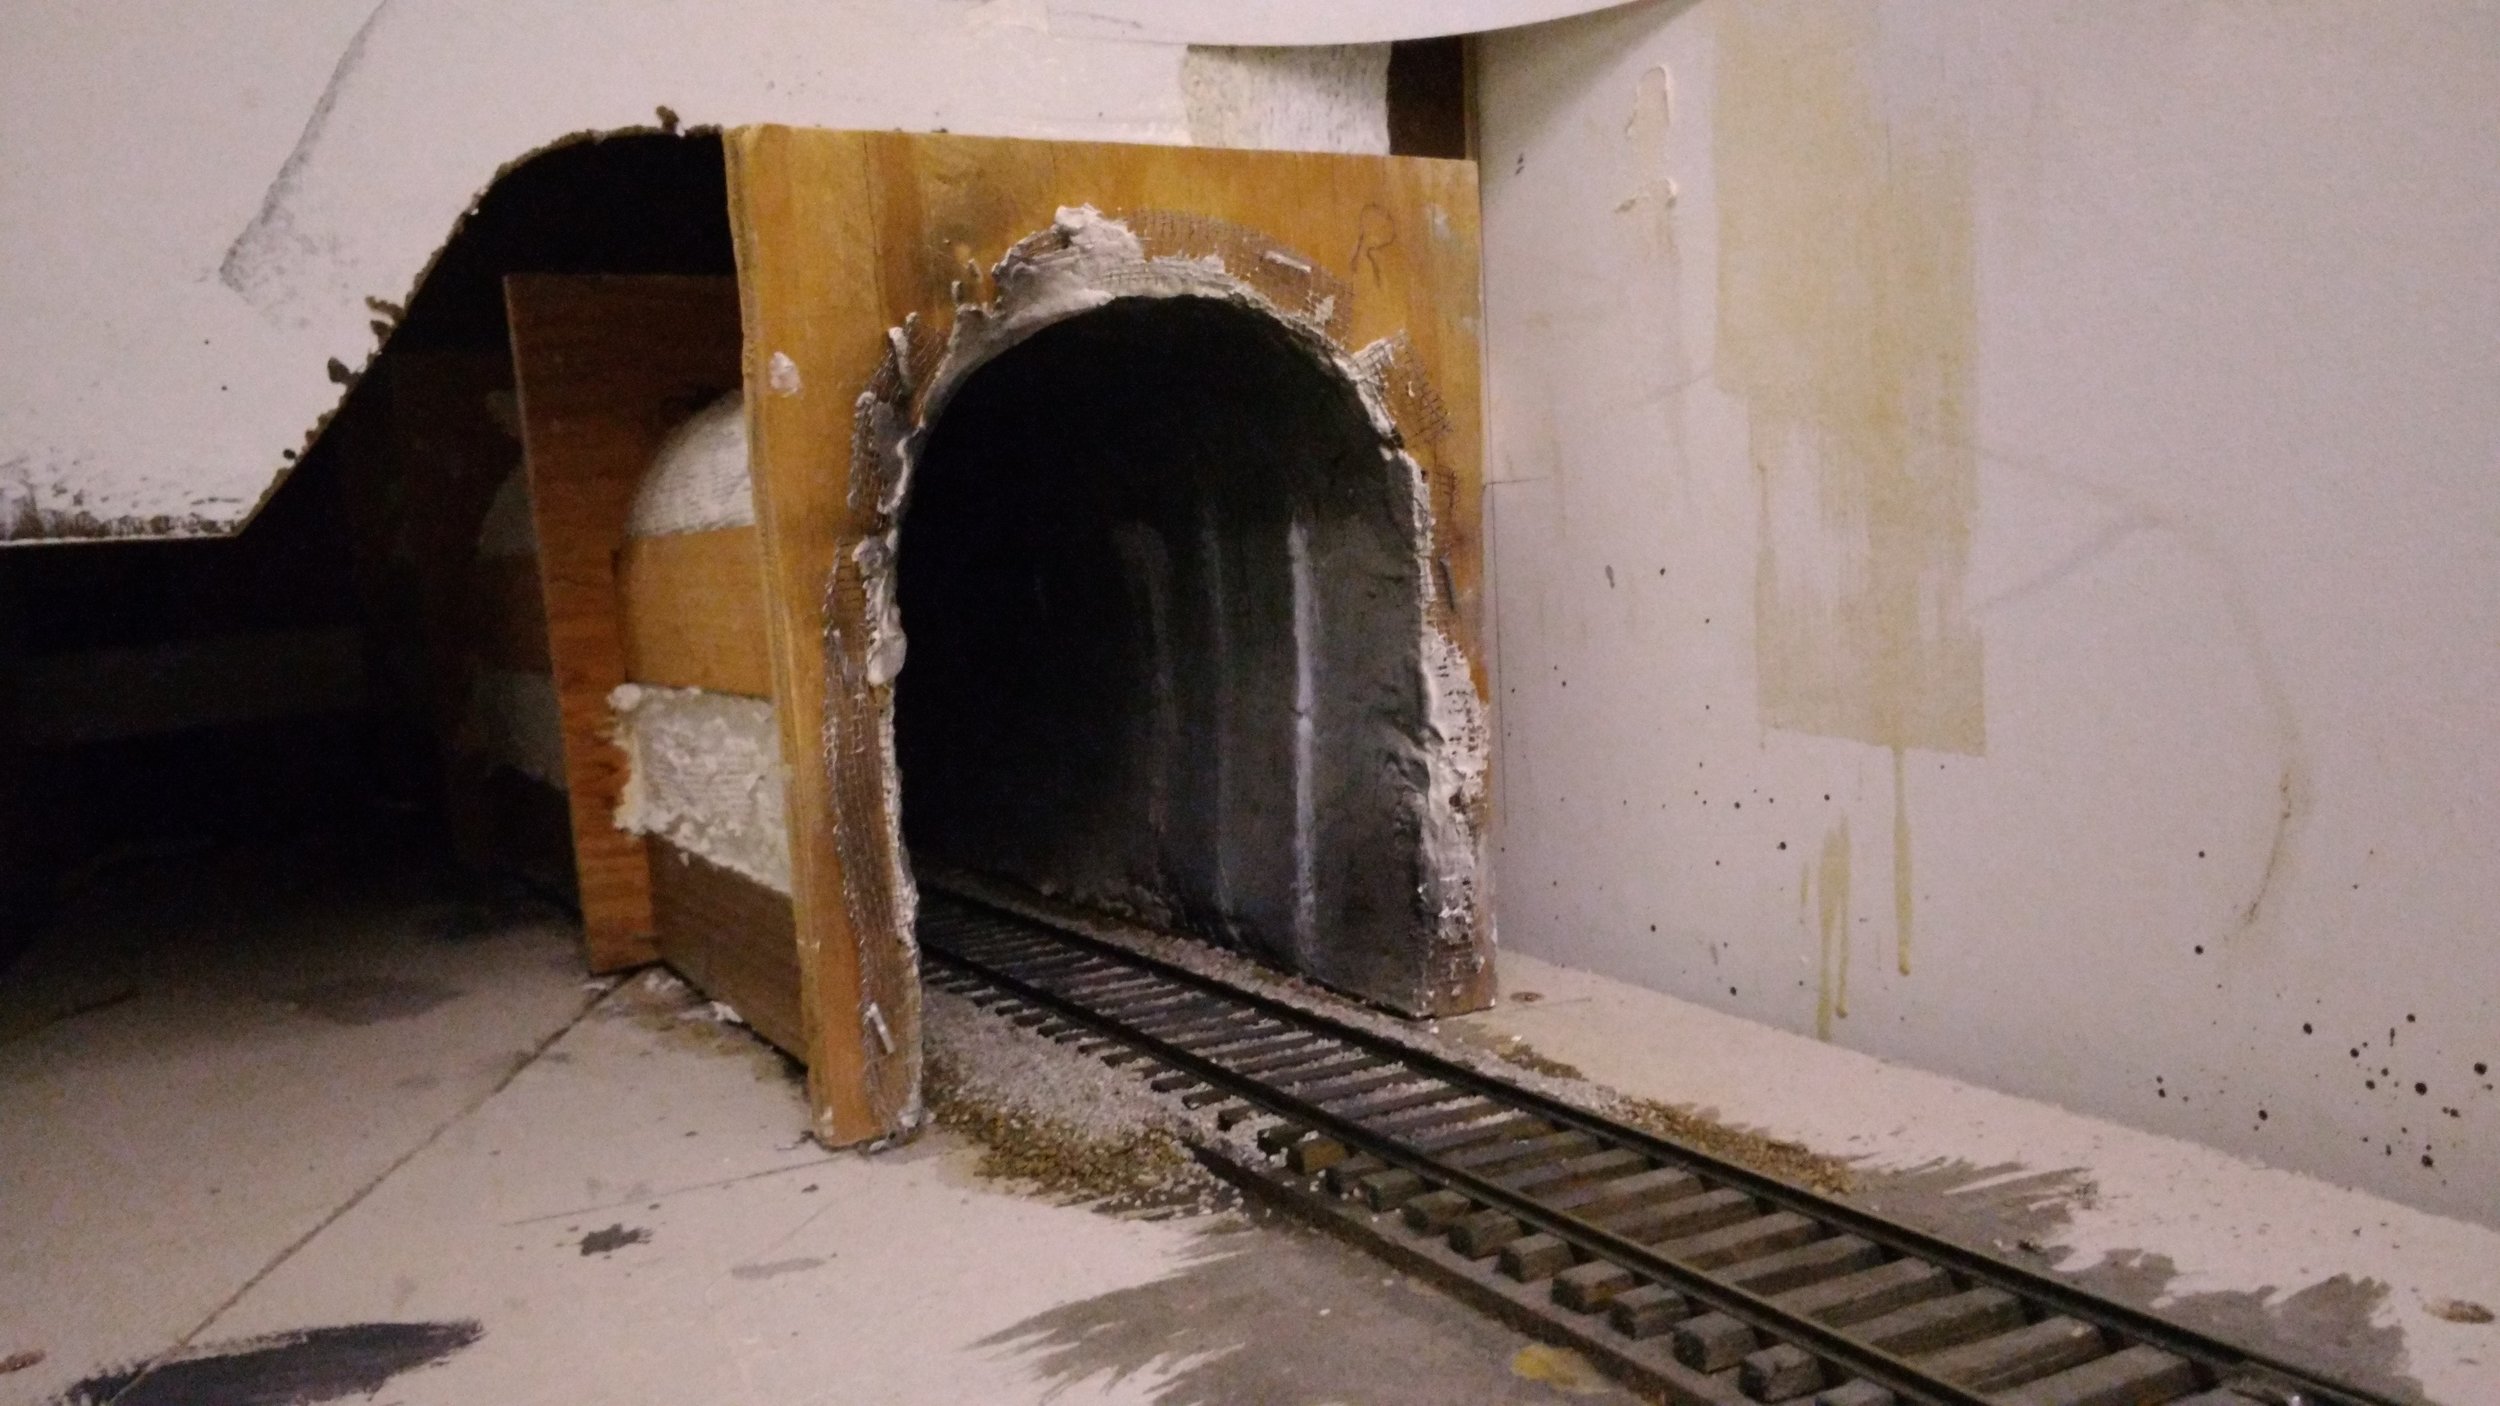  Leaving Apex we dive into Rockcut Tunnel. Lining the full length of a tunnel where possible makes sound equipped locos an awesome experience. The sound builds and the anticipation rises. The only thing missing is the hot blast.  Wood tunnel formers 